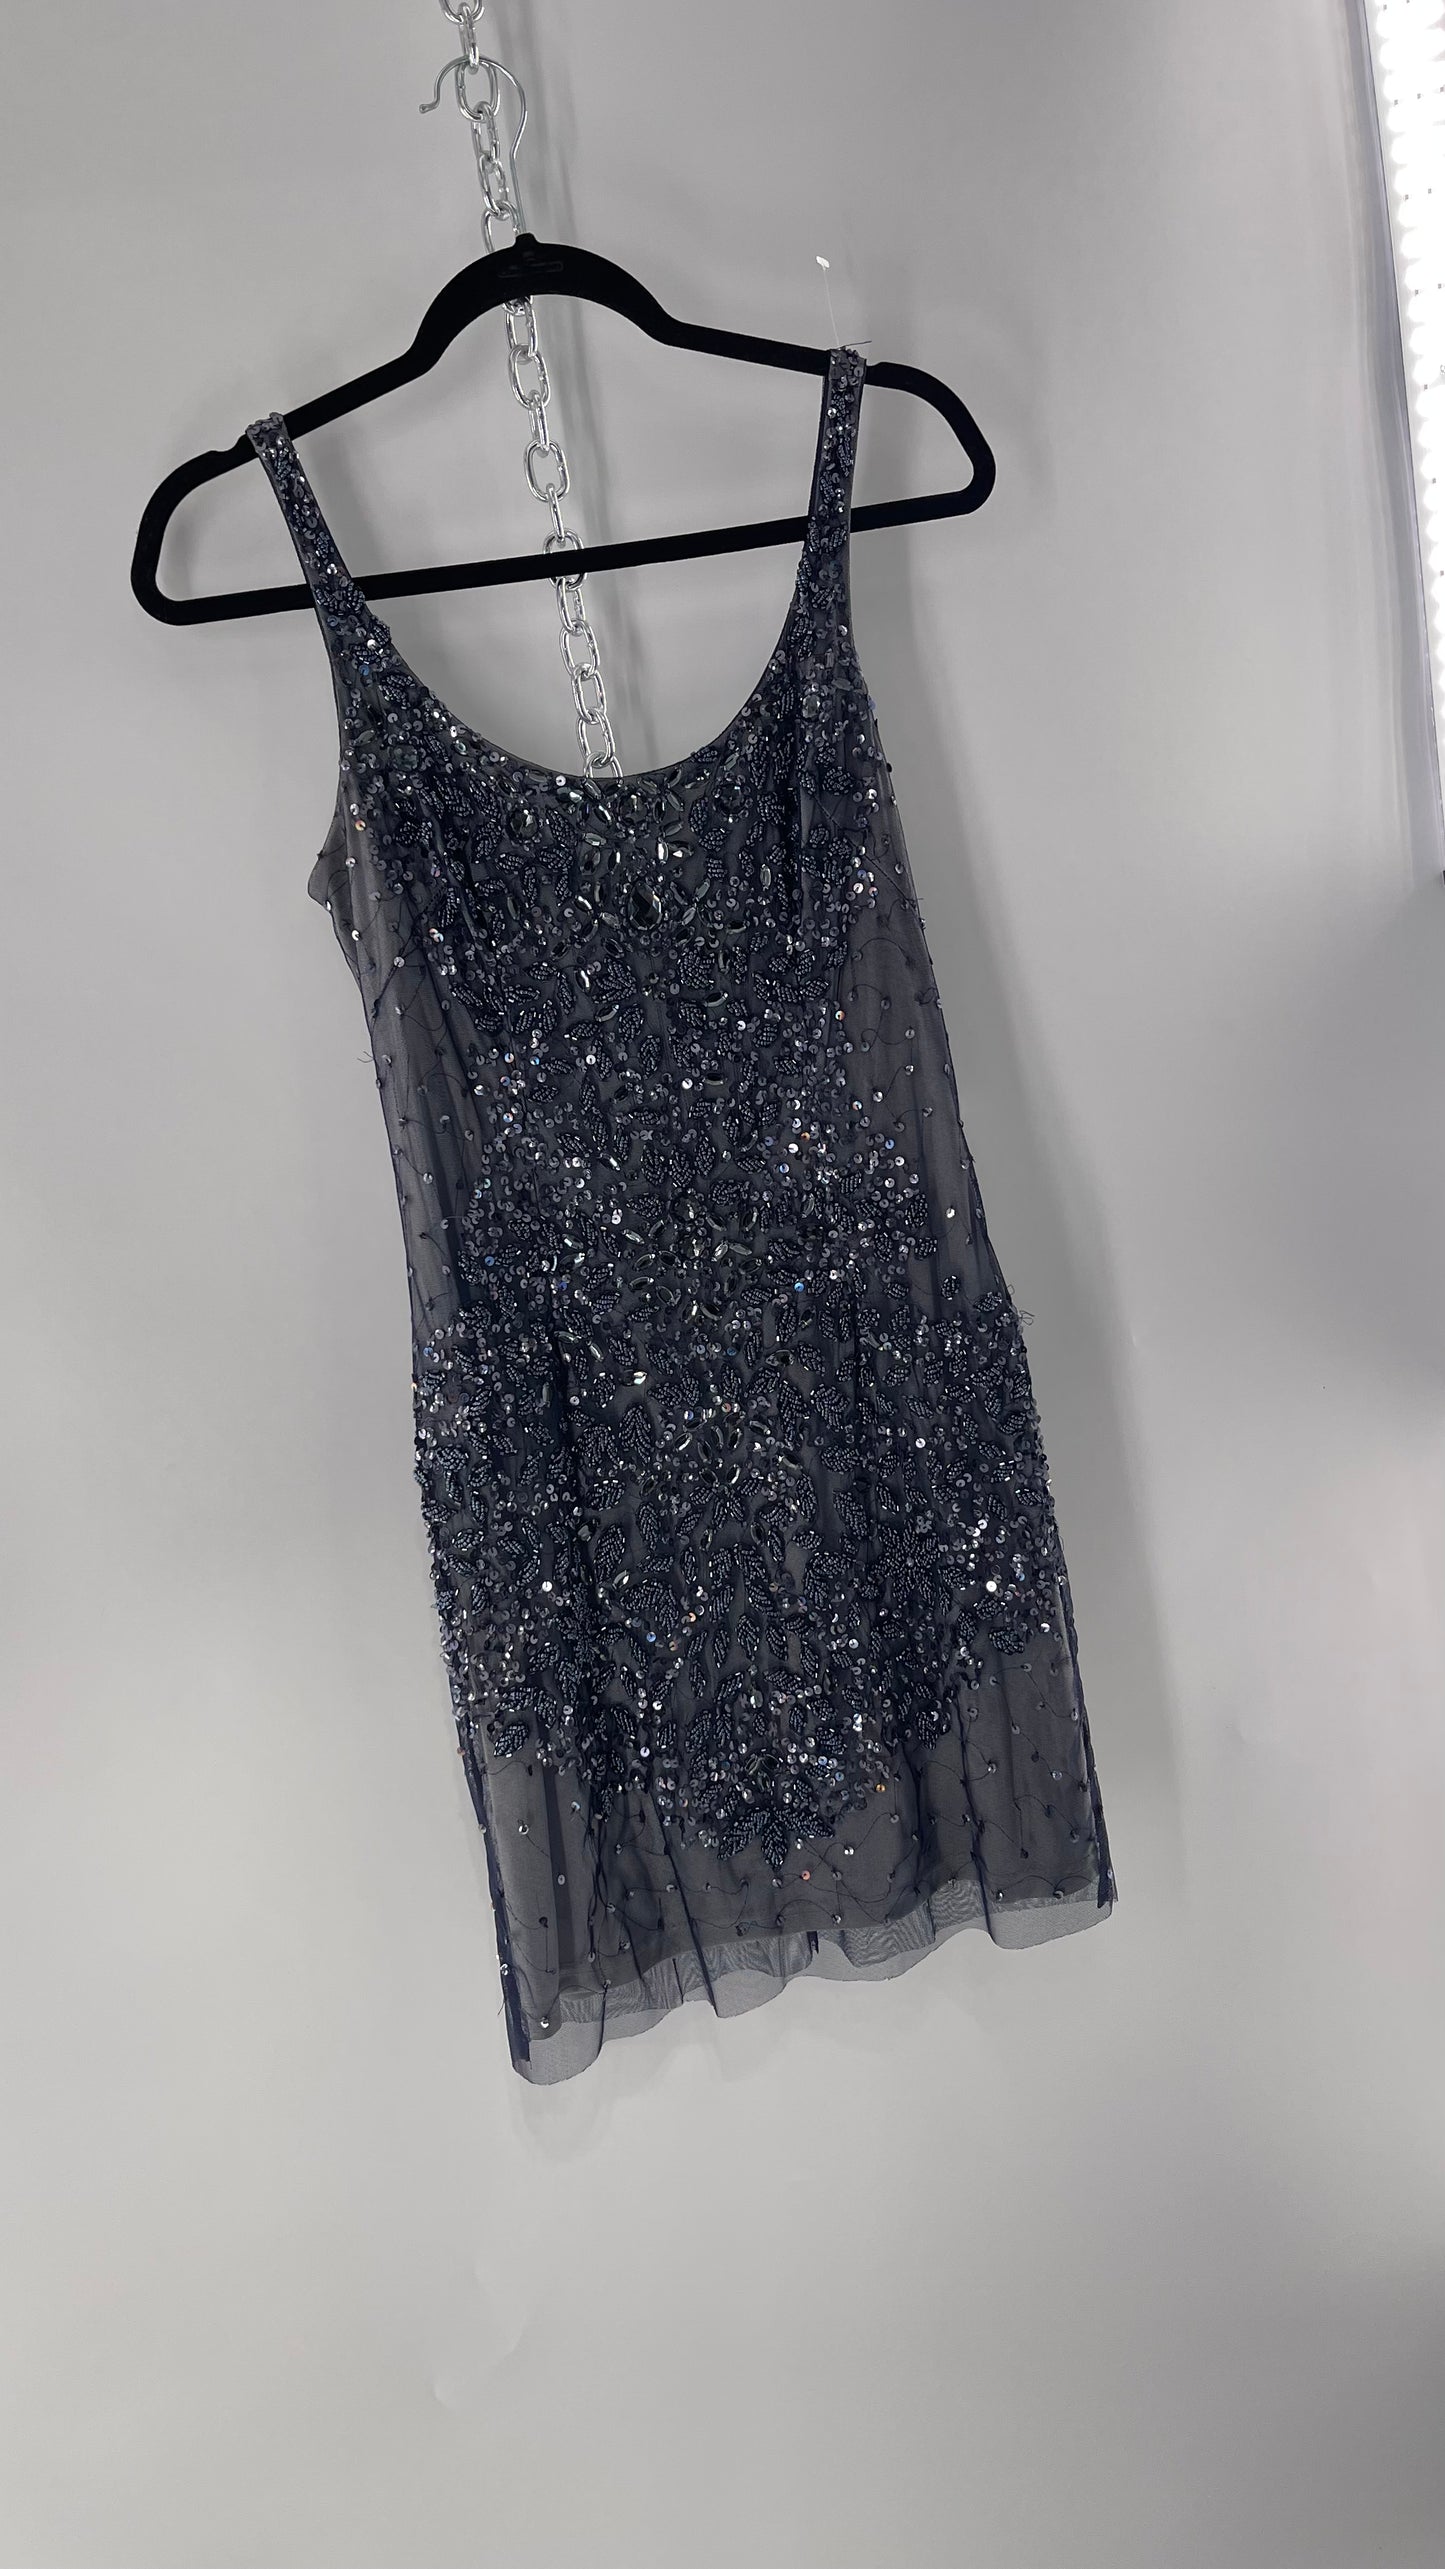 Vintage Cache Moonlight Grey/Navy Blue Tunic Mini Dress with Accentuating Placement of Beads, Sequins and Embroidery Details (2)